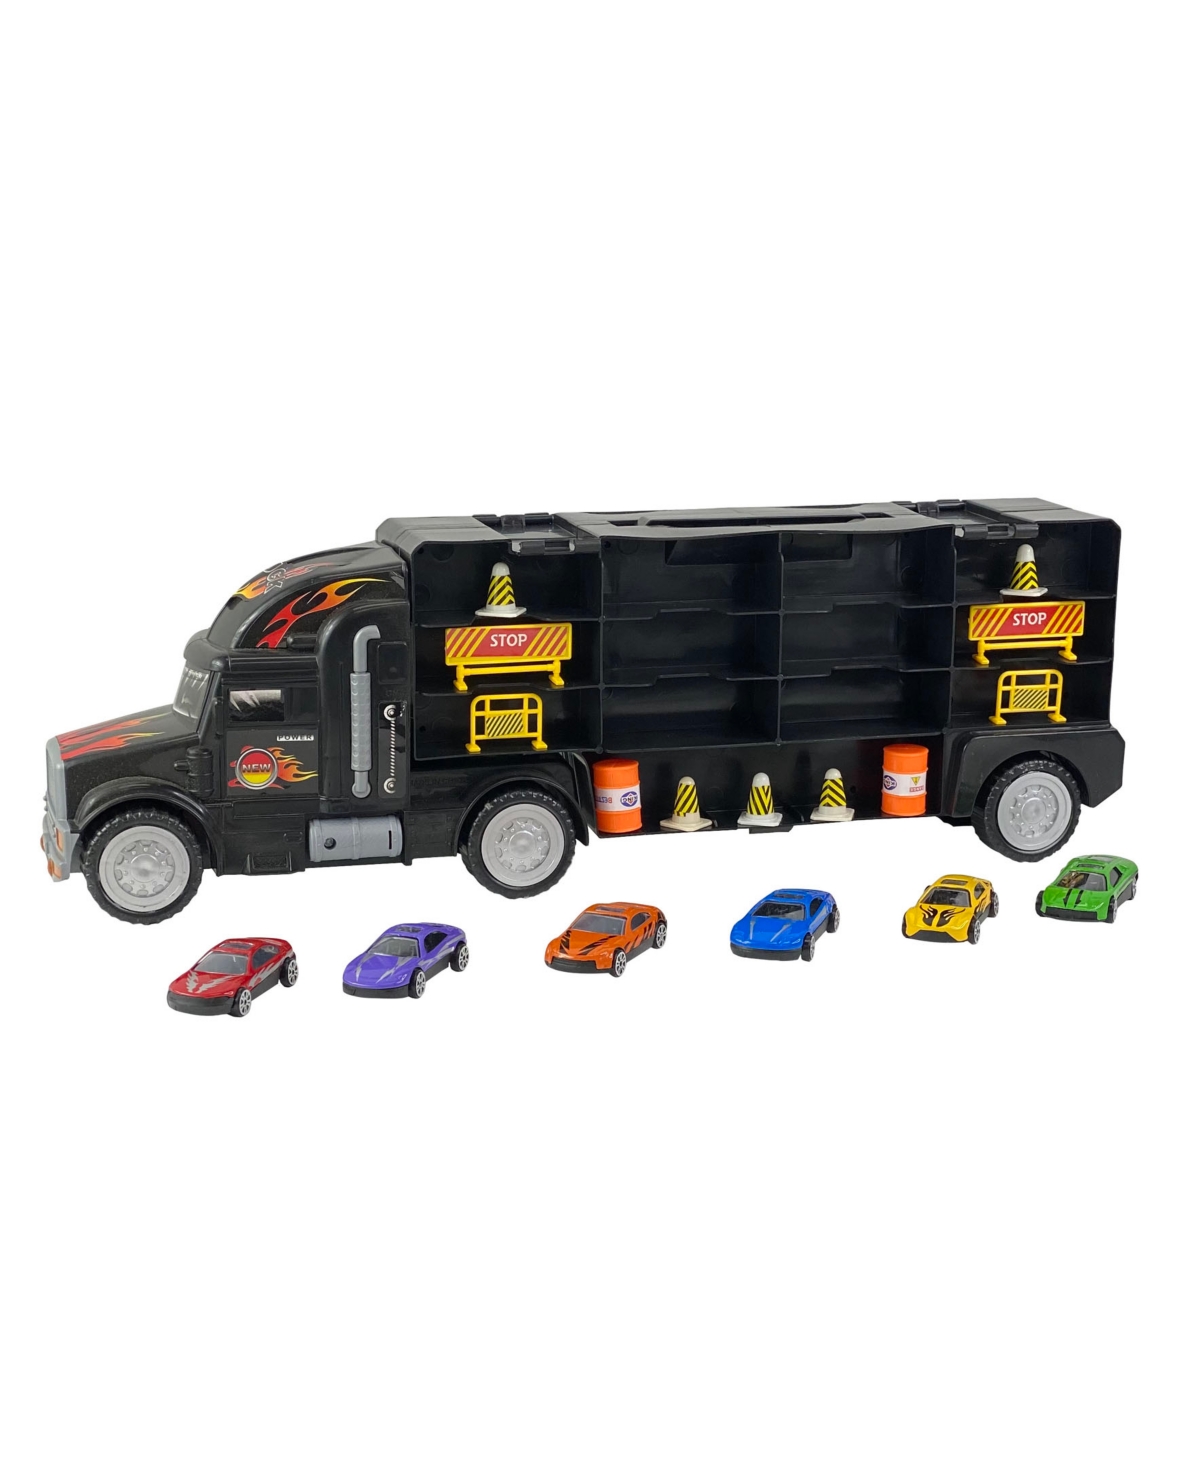 Big Daddy Mag-genius Car Carrier Tractor Trailer With 12 Cars And Accessories Toy In Multi